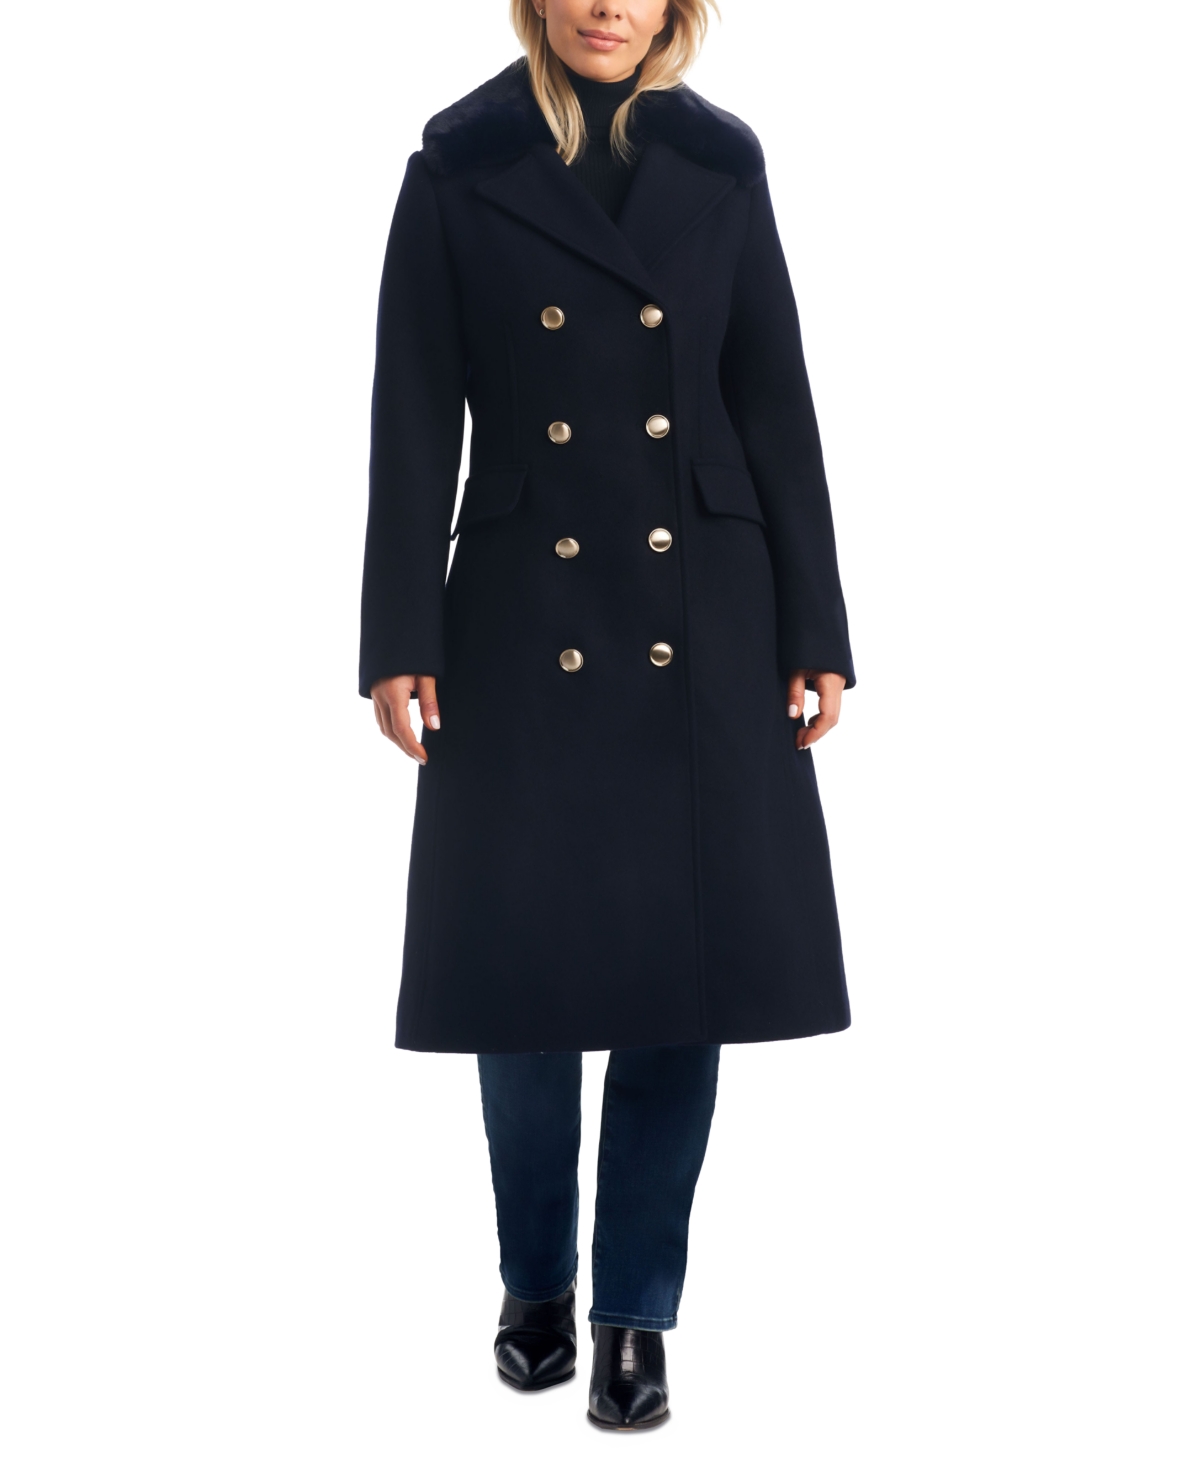 VINCE CAMUTO WOMEN'S DOUBLE-BREASTED FAUX-FUR-COLLAR WOOL BLEND COAT